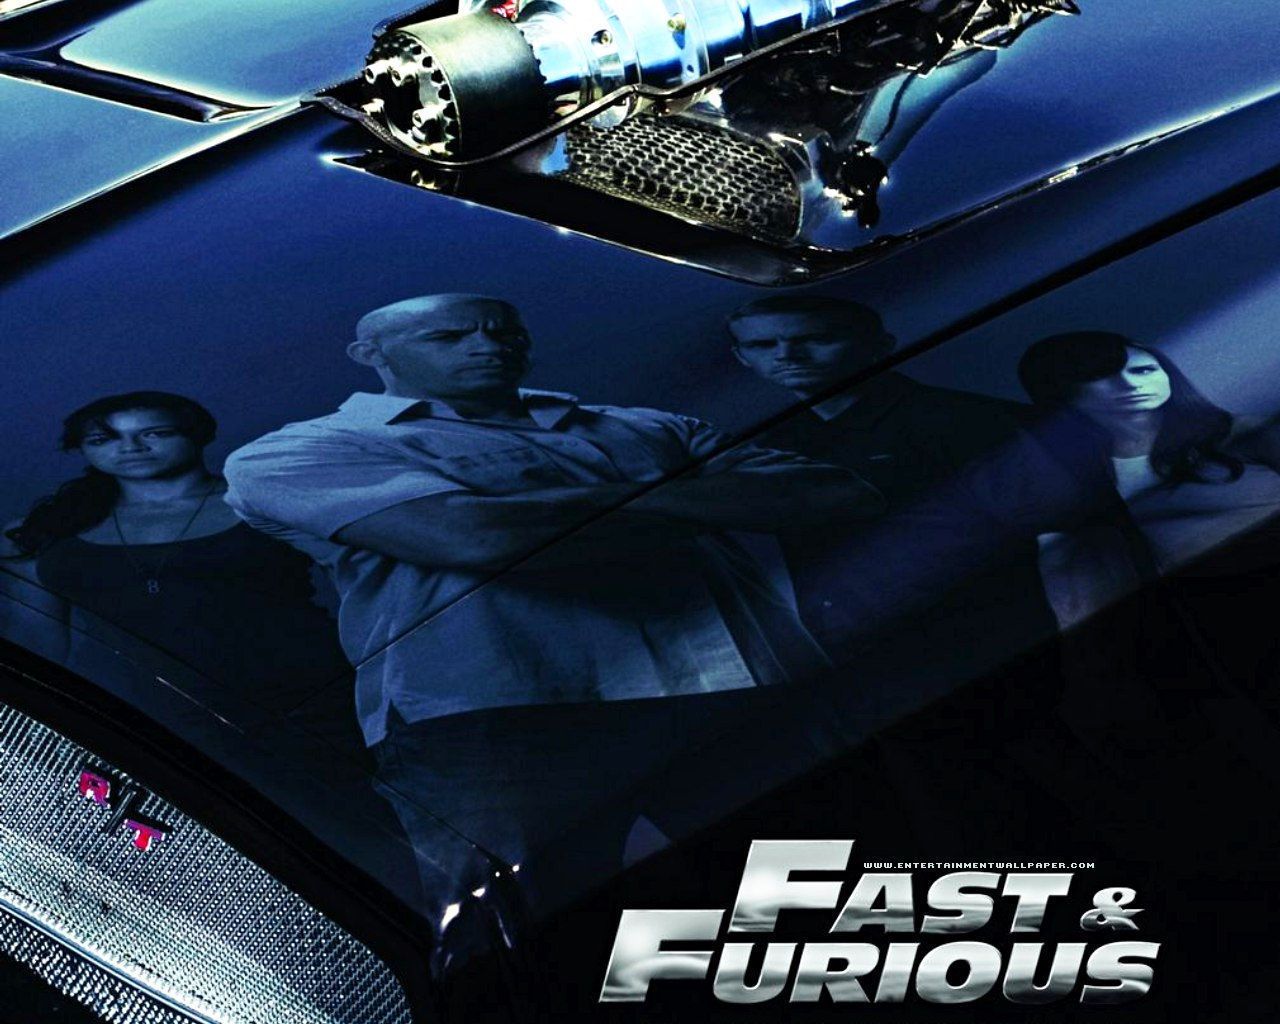 Fast & Furious Wallpaper - Fast and Furious Wallpaper (4597881 ...